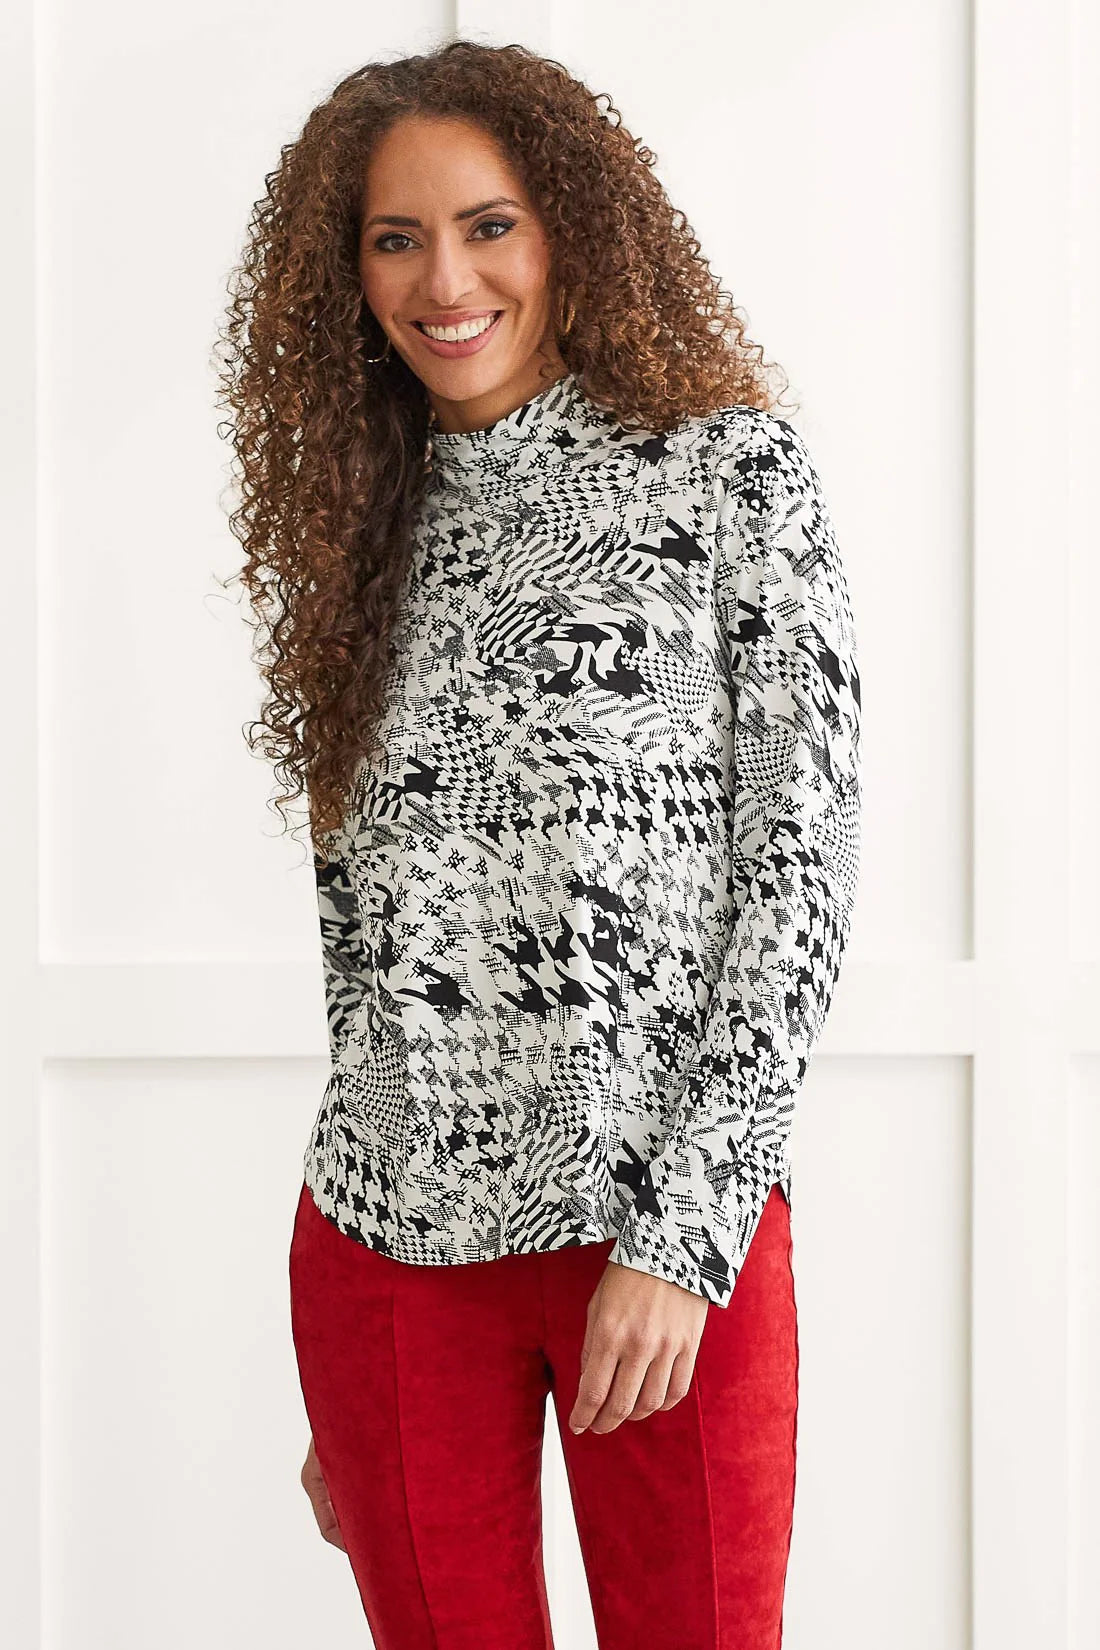 You're a force to be reckoned with and this long-sleeve top is the perfect companion to showcase your fierceness. We're crushing on the elevated mock neckline, all-over pattern printed on stretchy jersey fabric, and scooped hem that gives it a flattering finish.